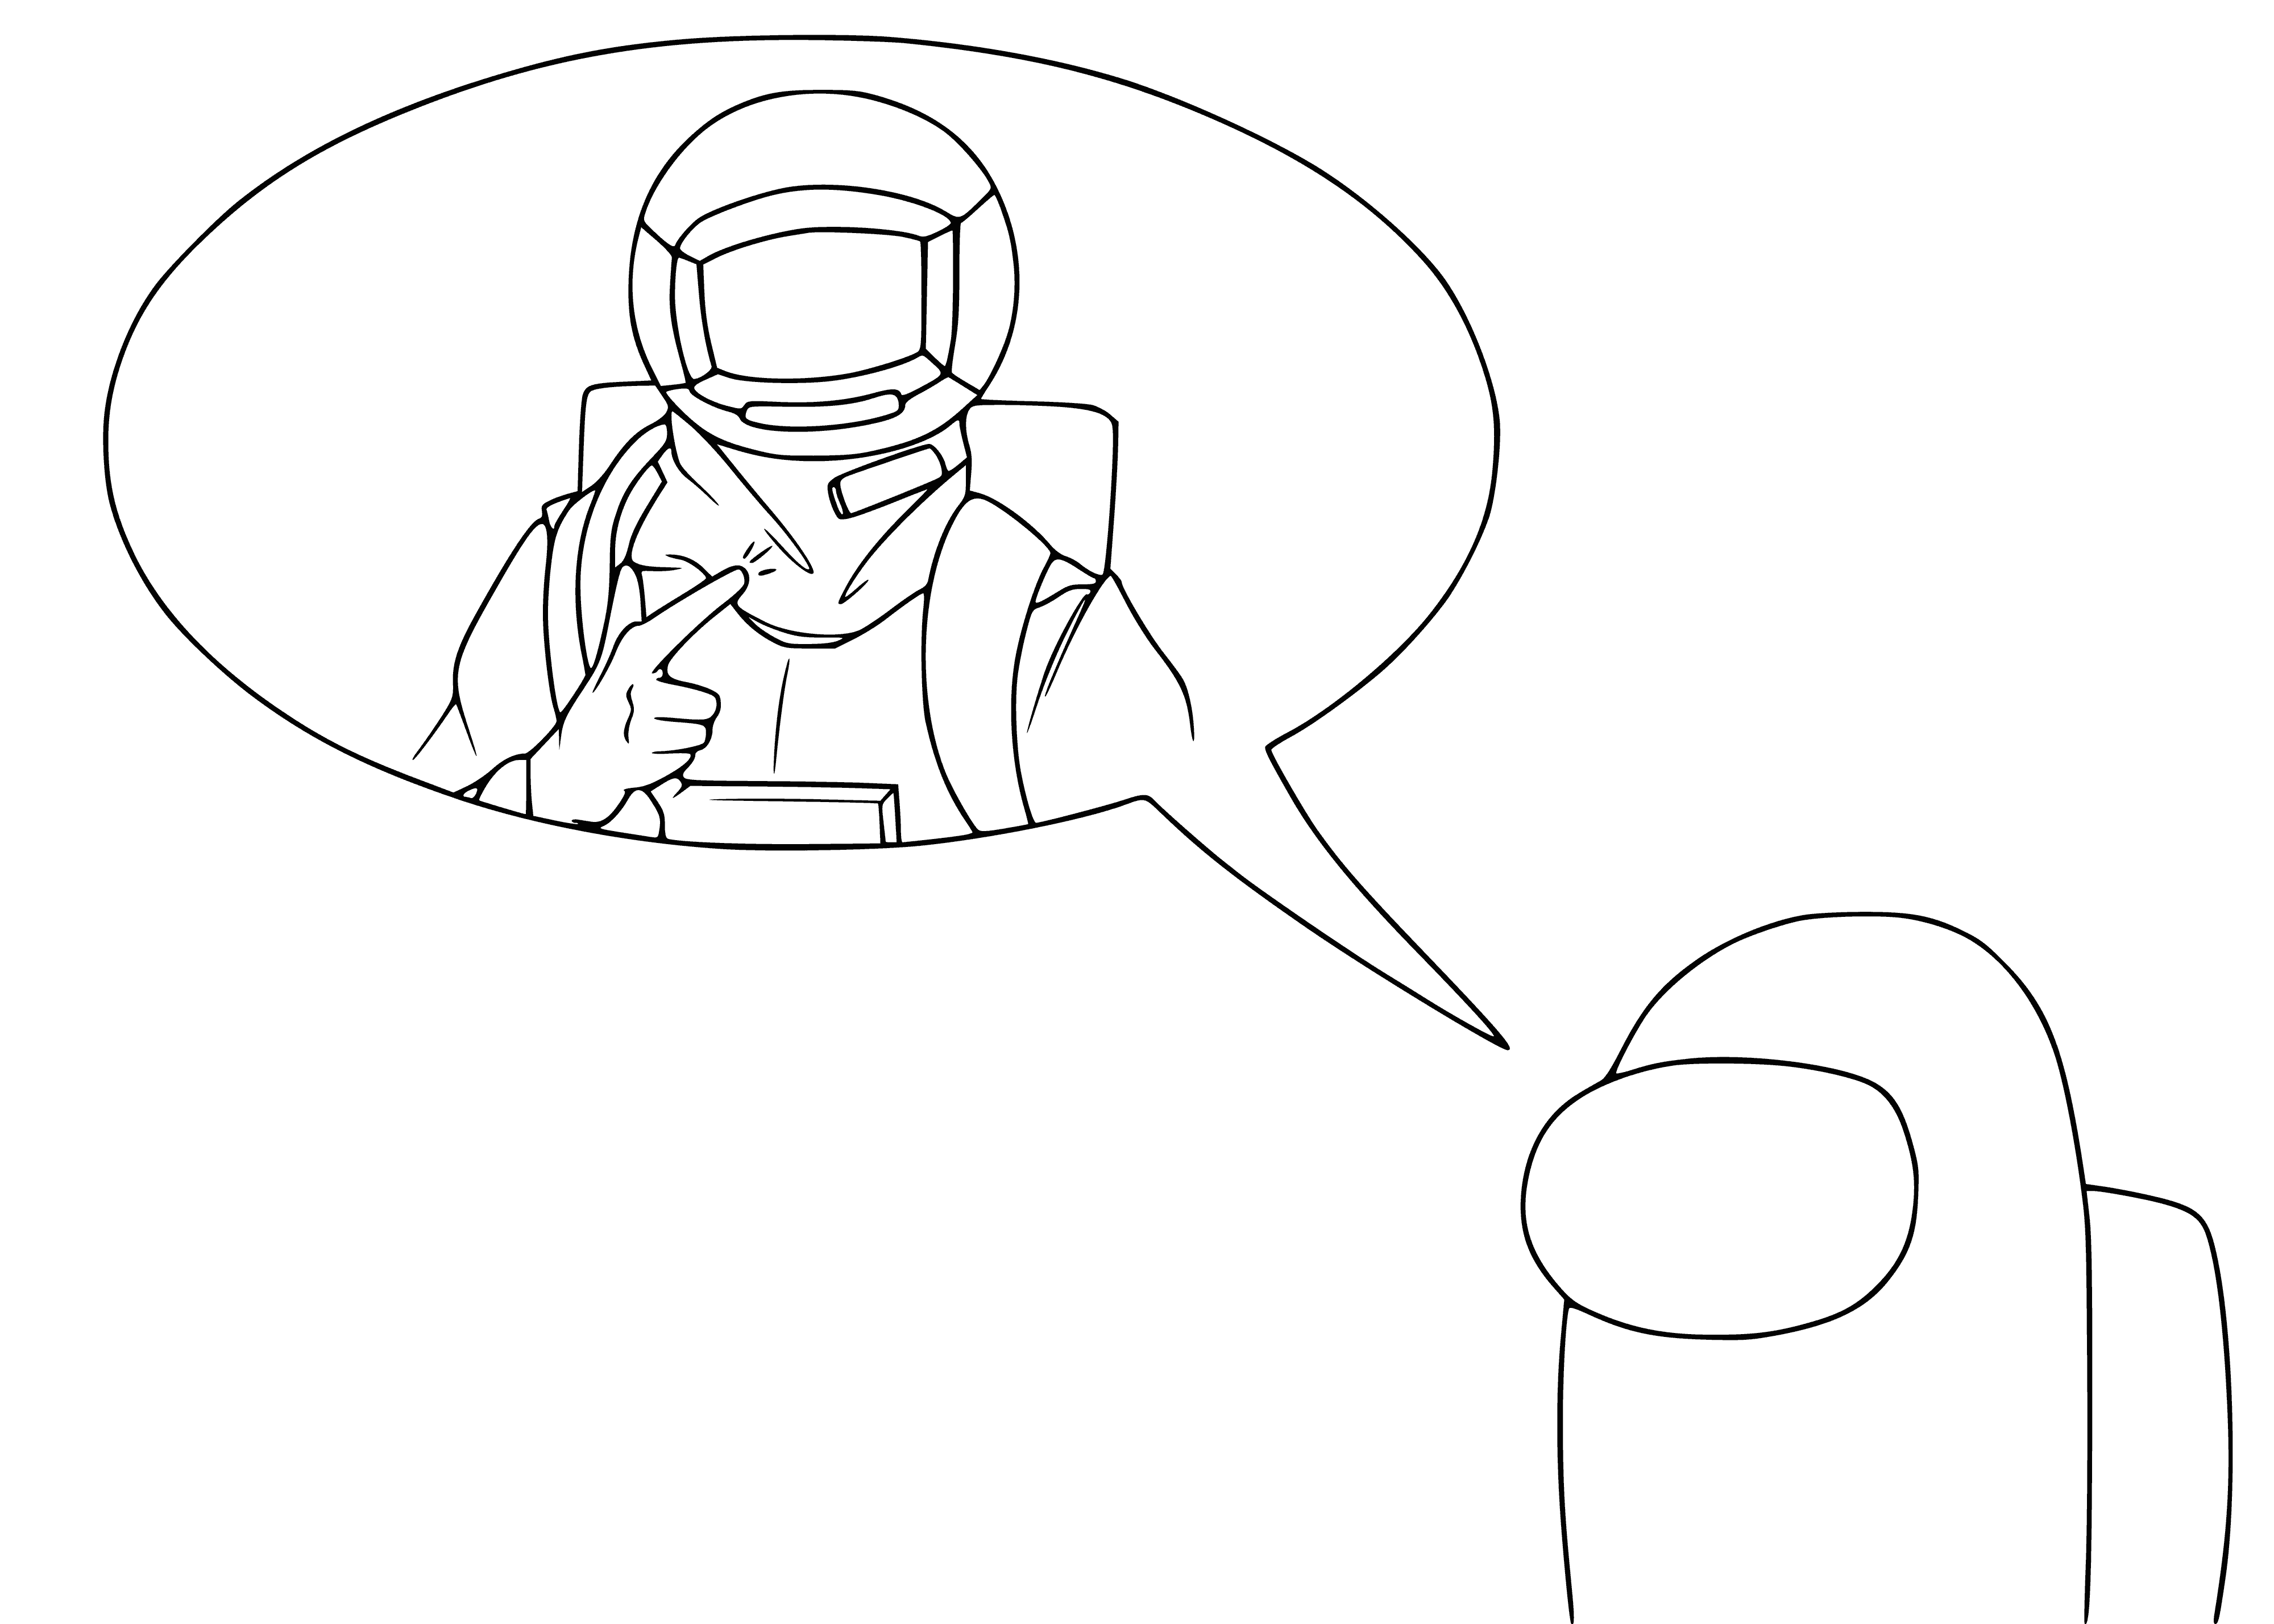 coloring page: Four among us characters float in zero gravity, surrounded by a mysterious outer space backdrop.